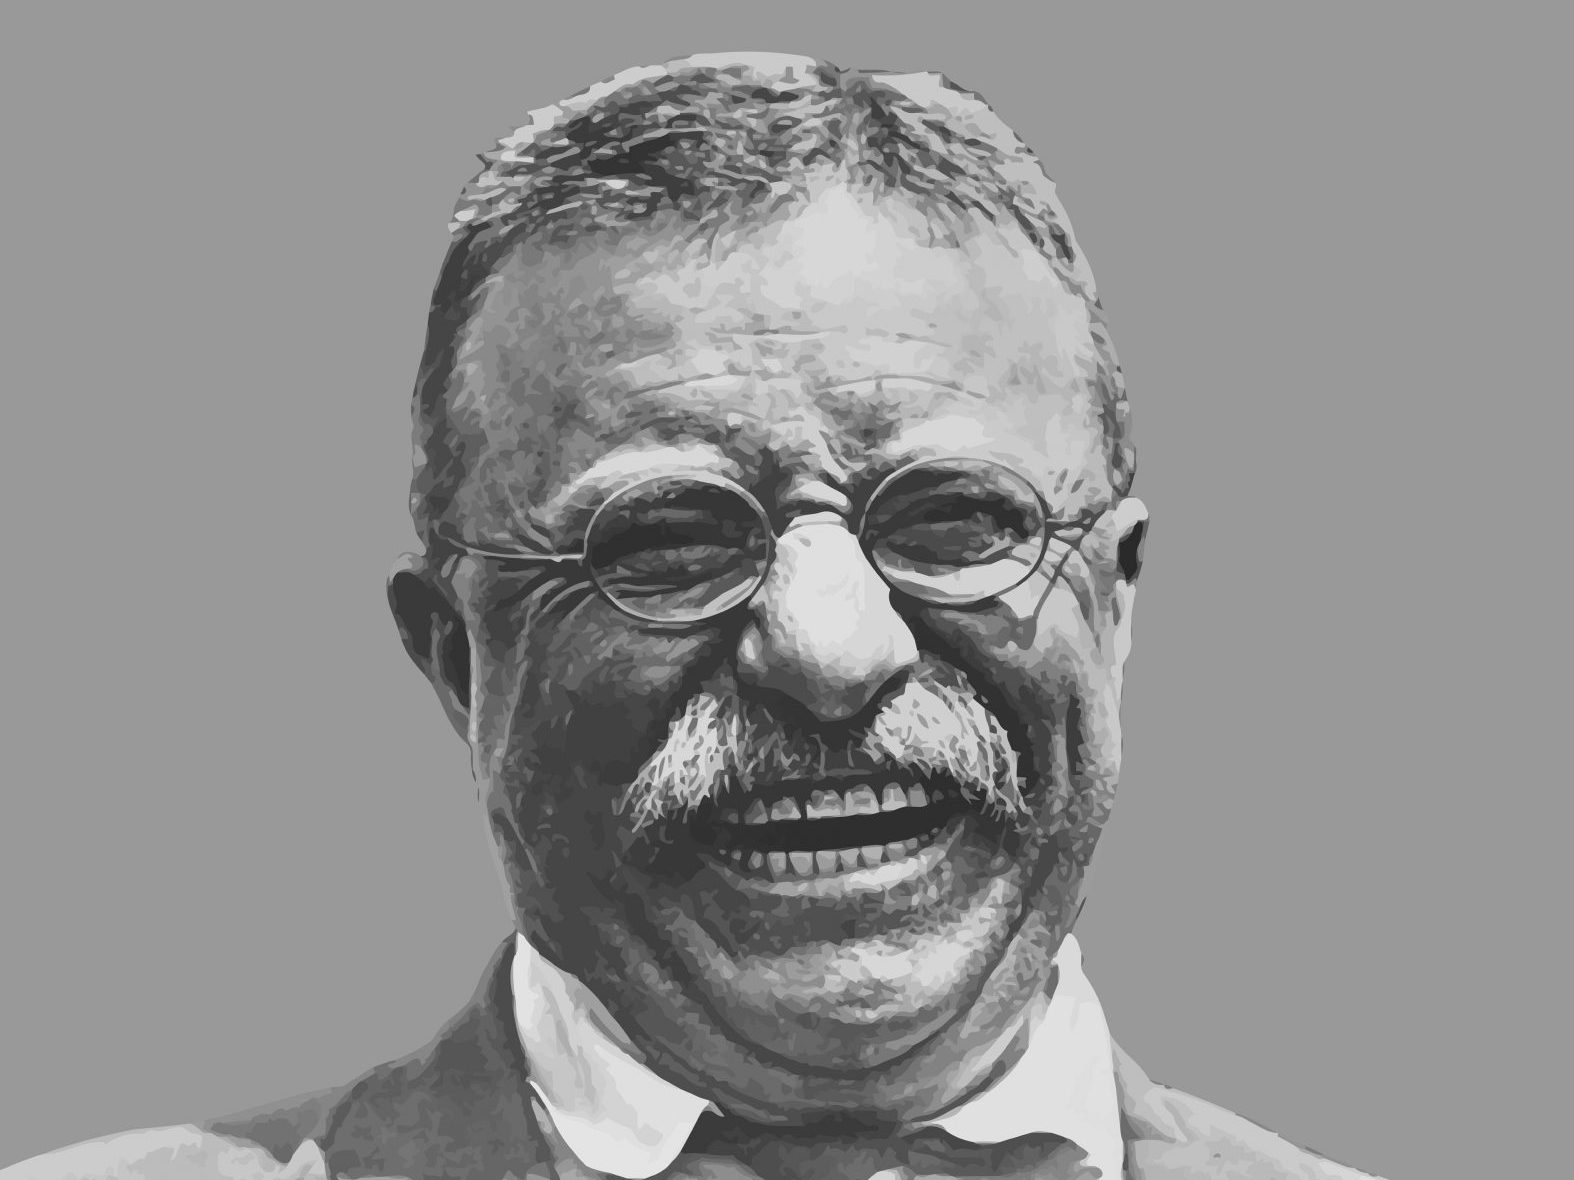 Theodore Roosevelt smiling - he is credited with formulating the Big Stick Ideology. Photo: John Parrot/Getty Images/Stocktrek Images